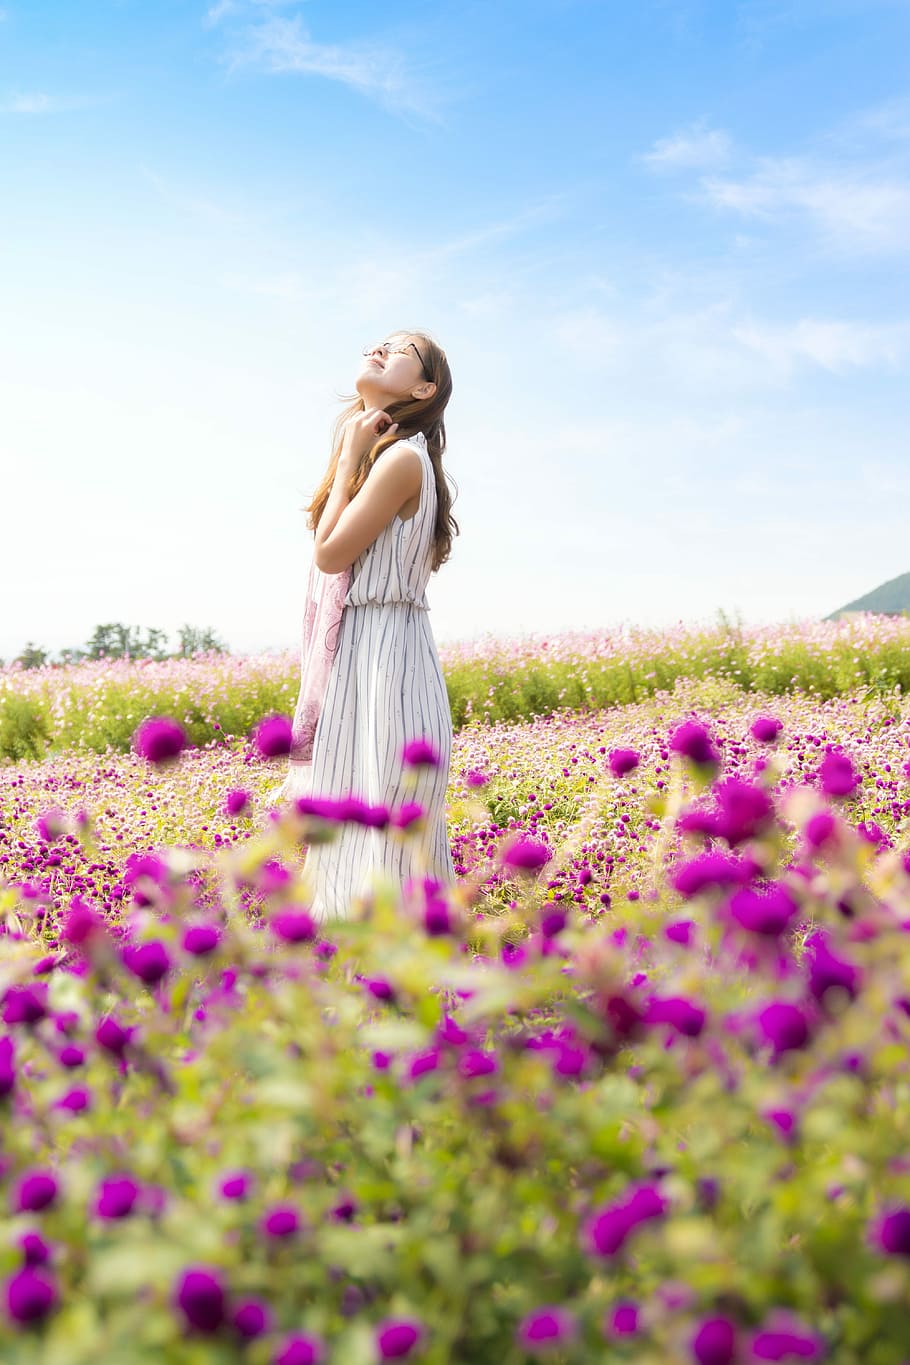 standing woman surrounded by purple flowers during daytime, field